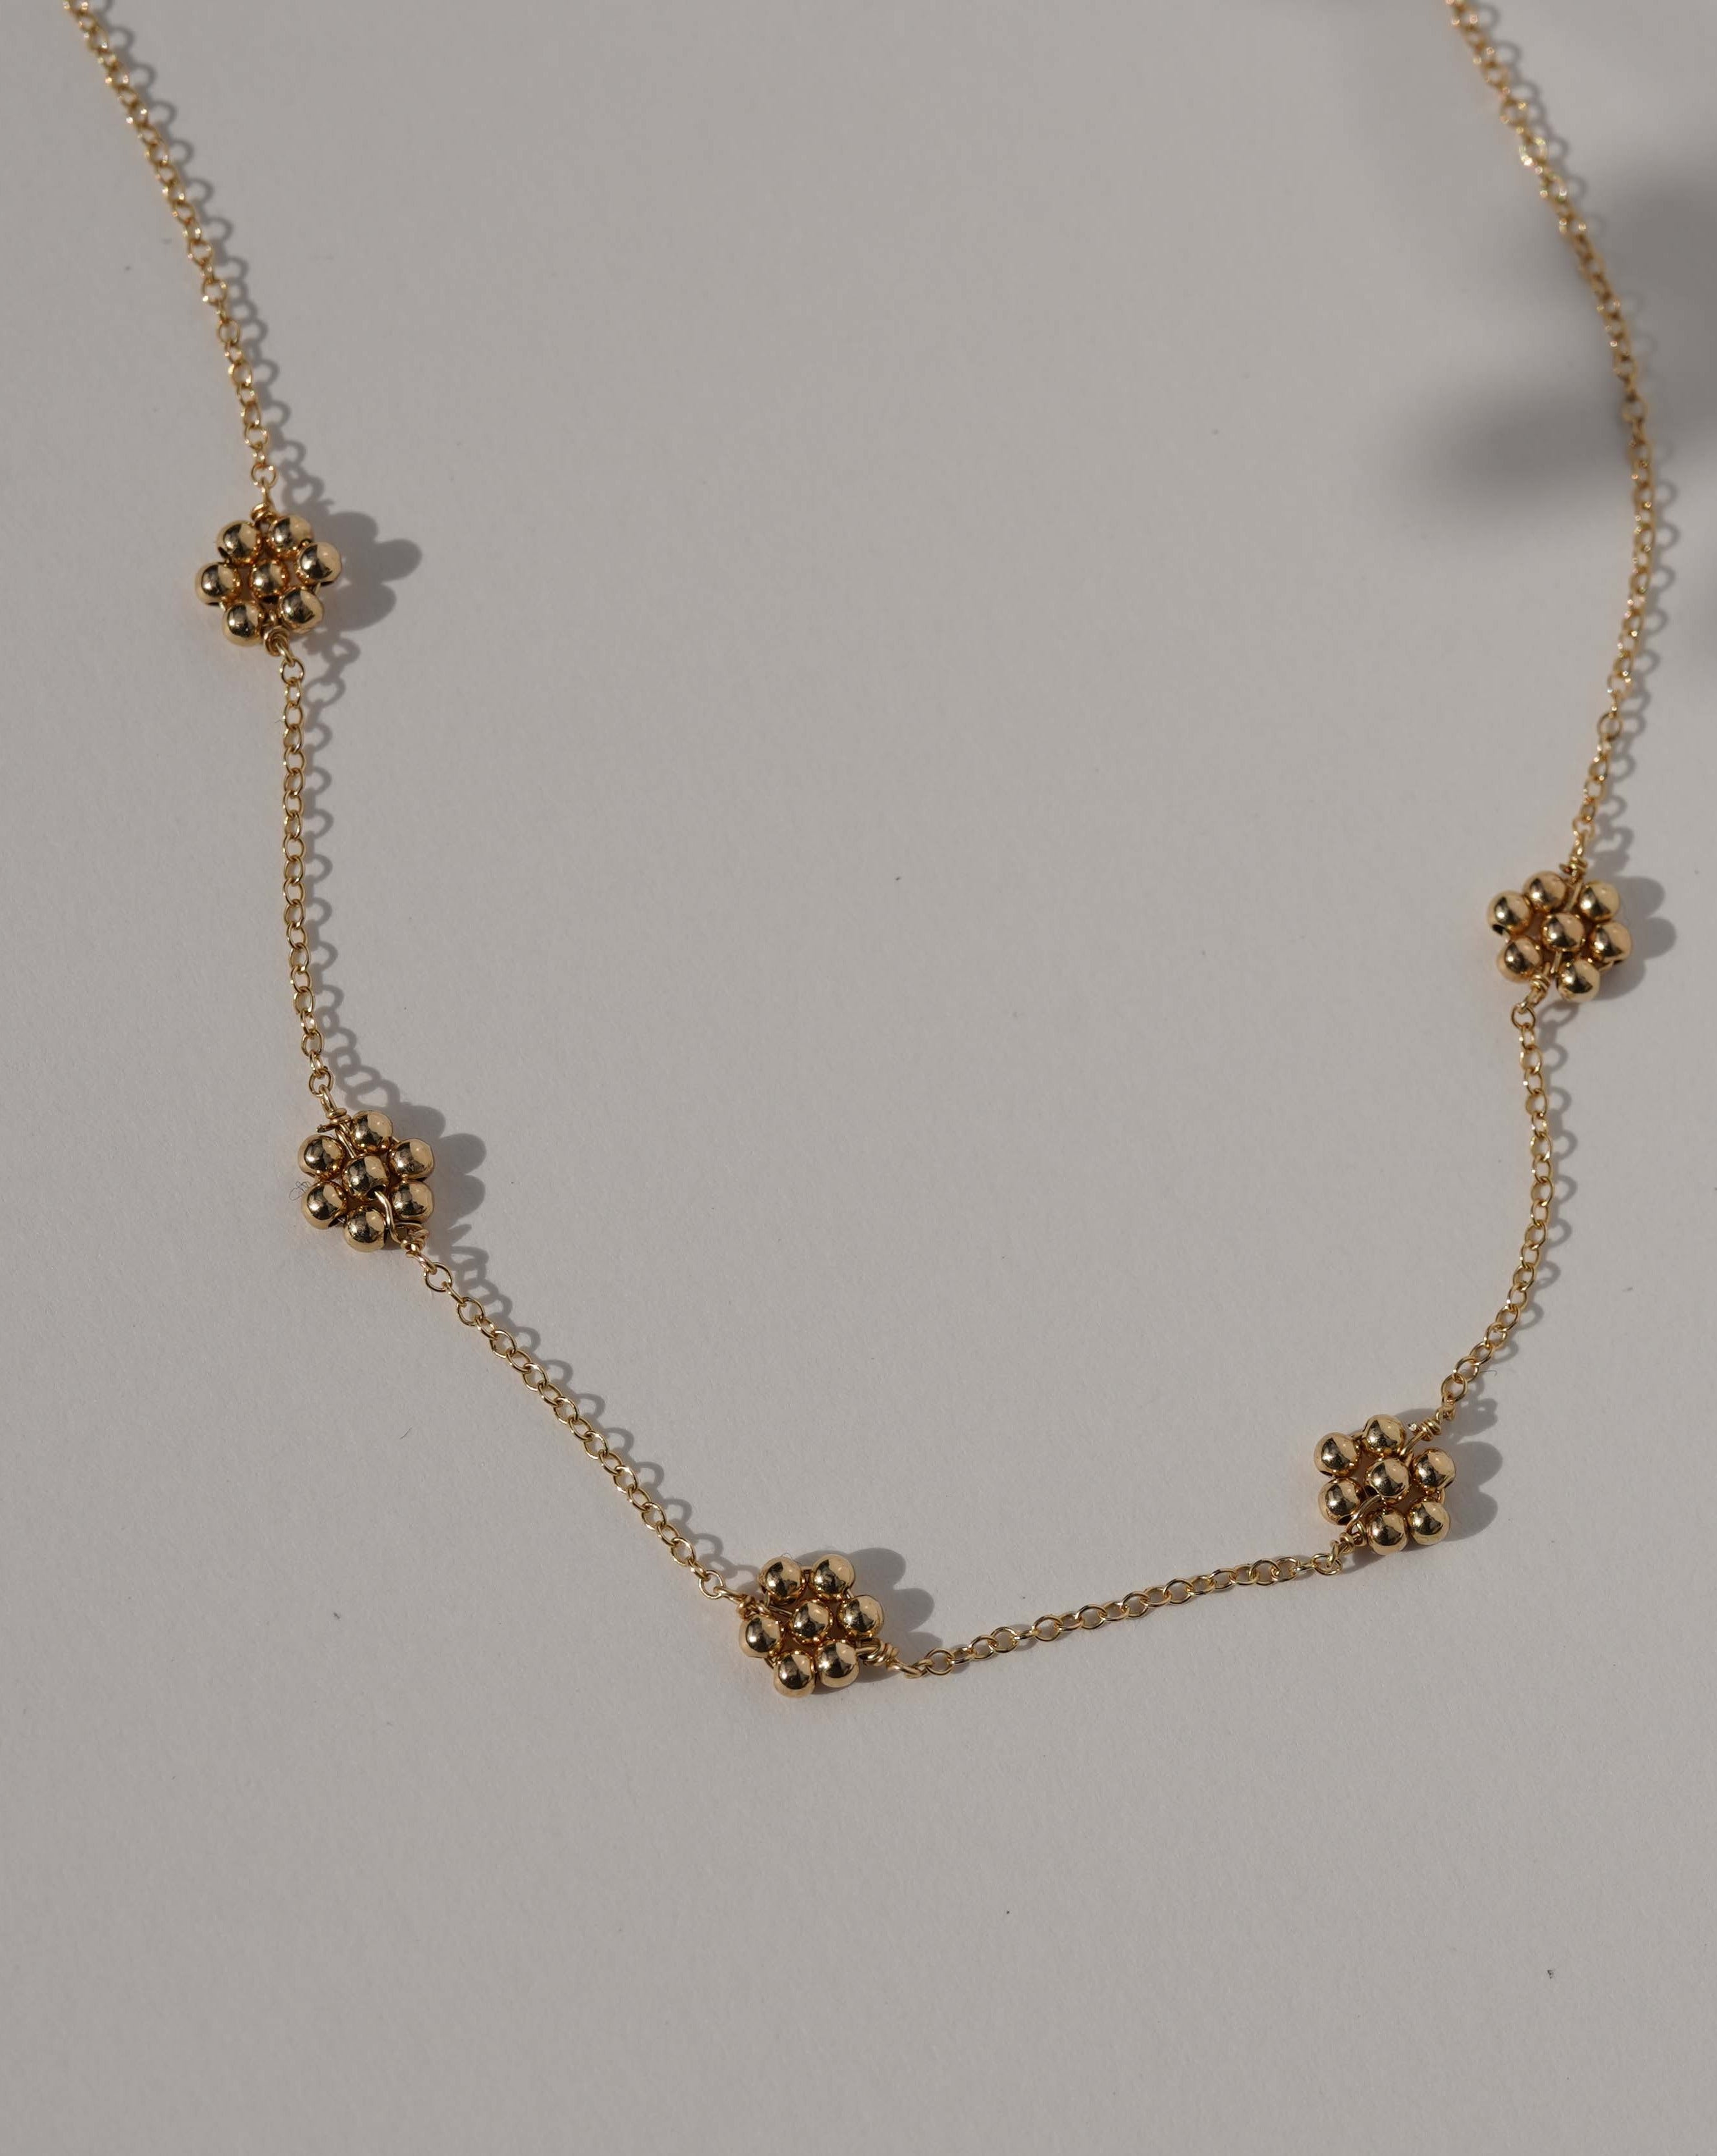 Florencia Necklace by KOZAKH. A 16 to 18 inch adjustable length necklace in 14K Gold Filled, featuring handmade gold beaded daisies.